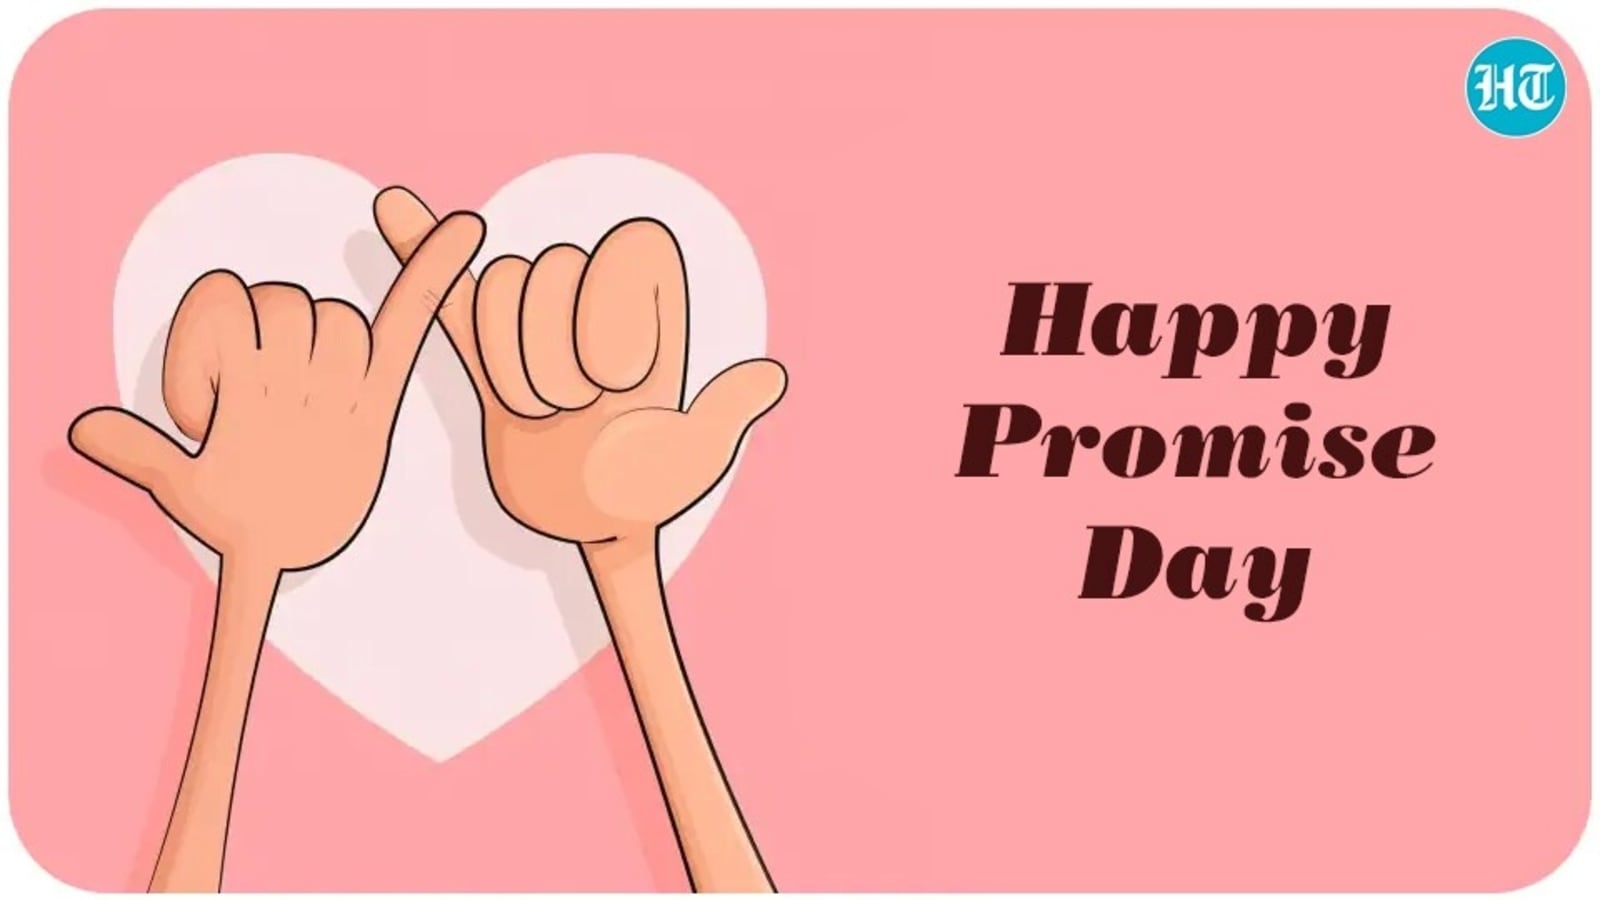 Happy Promise Day 2022 Wishes Messages Images To Send To Your Loved